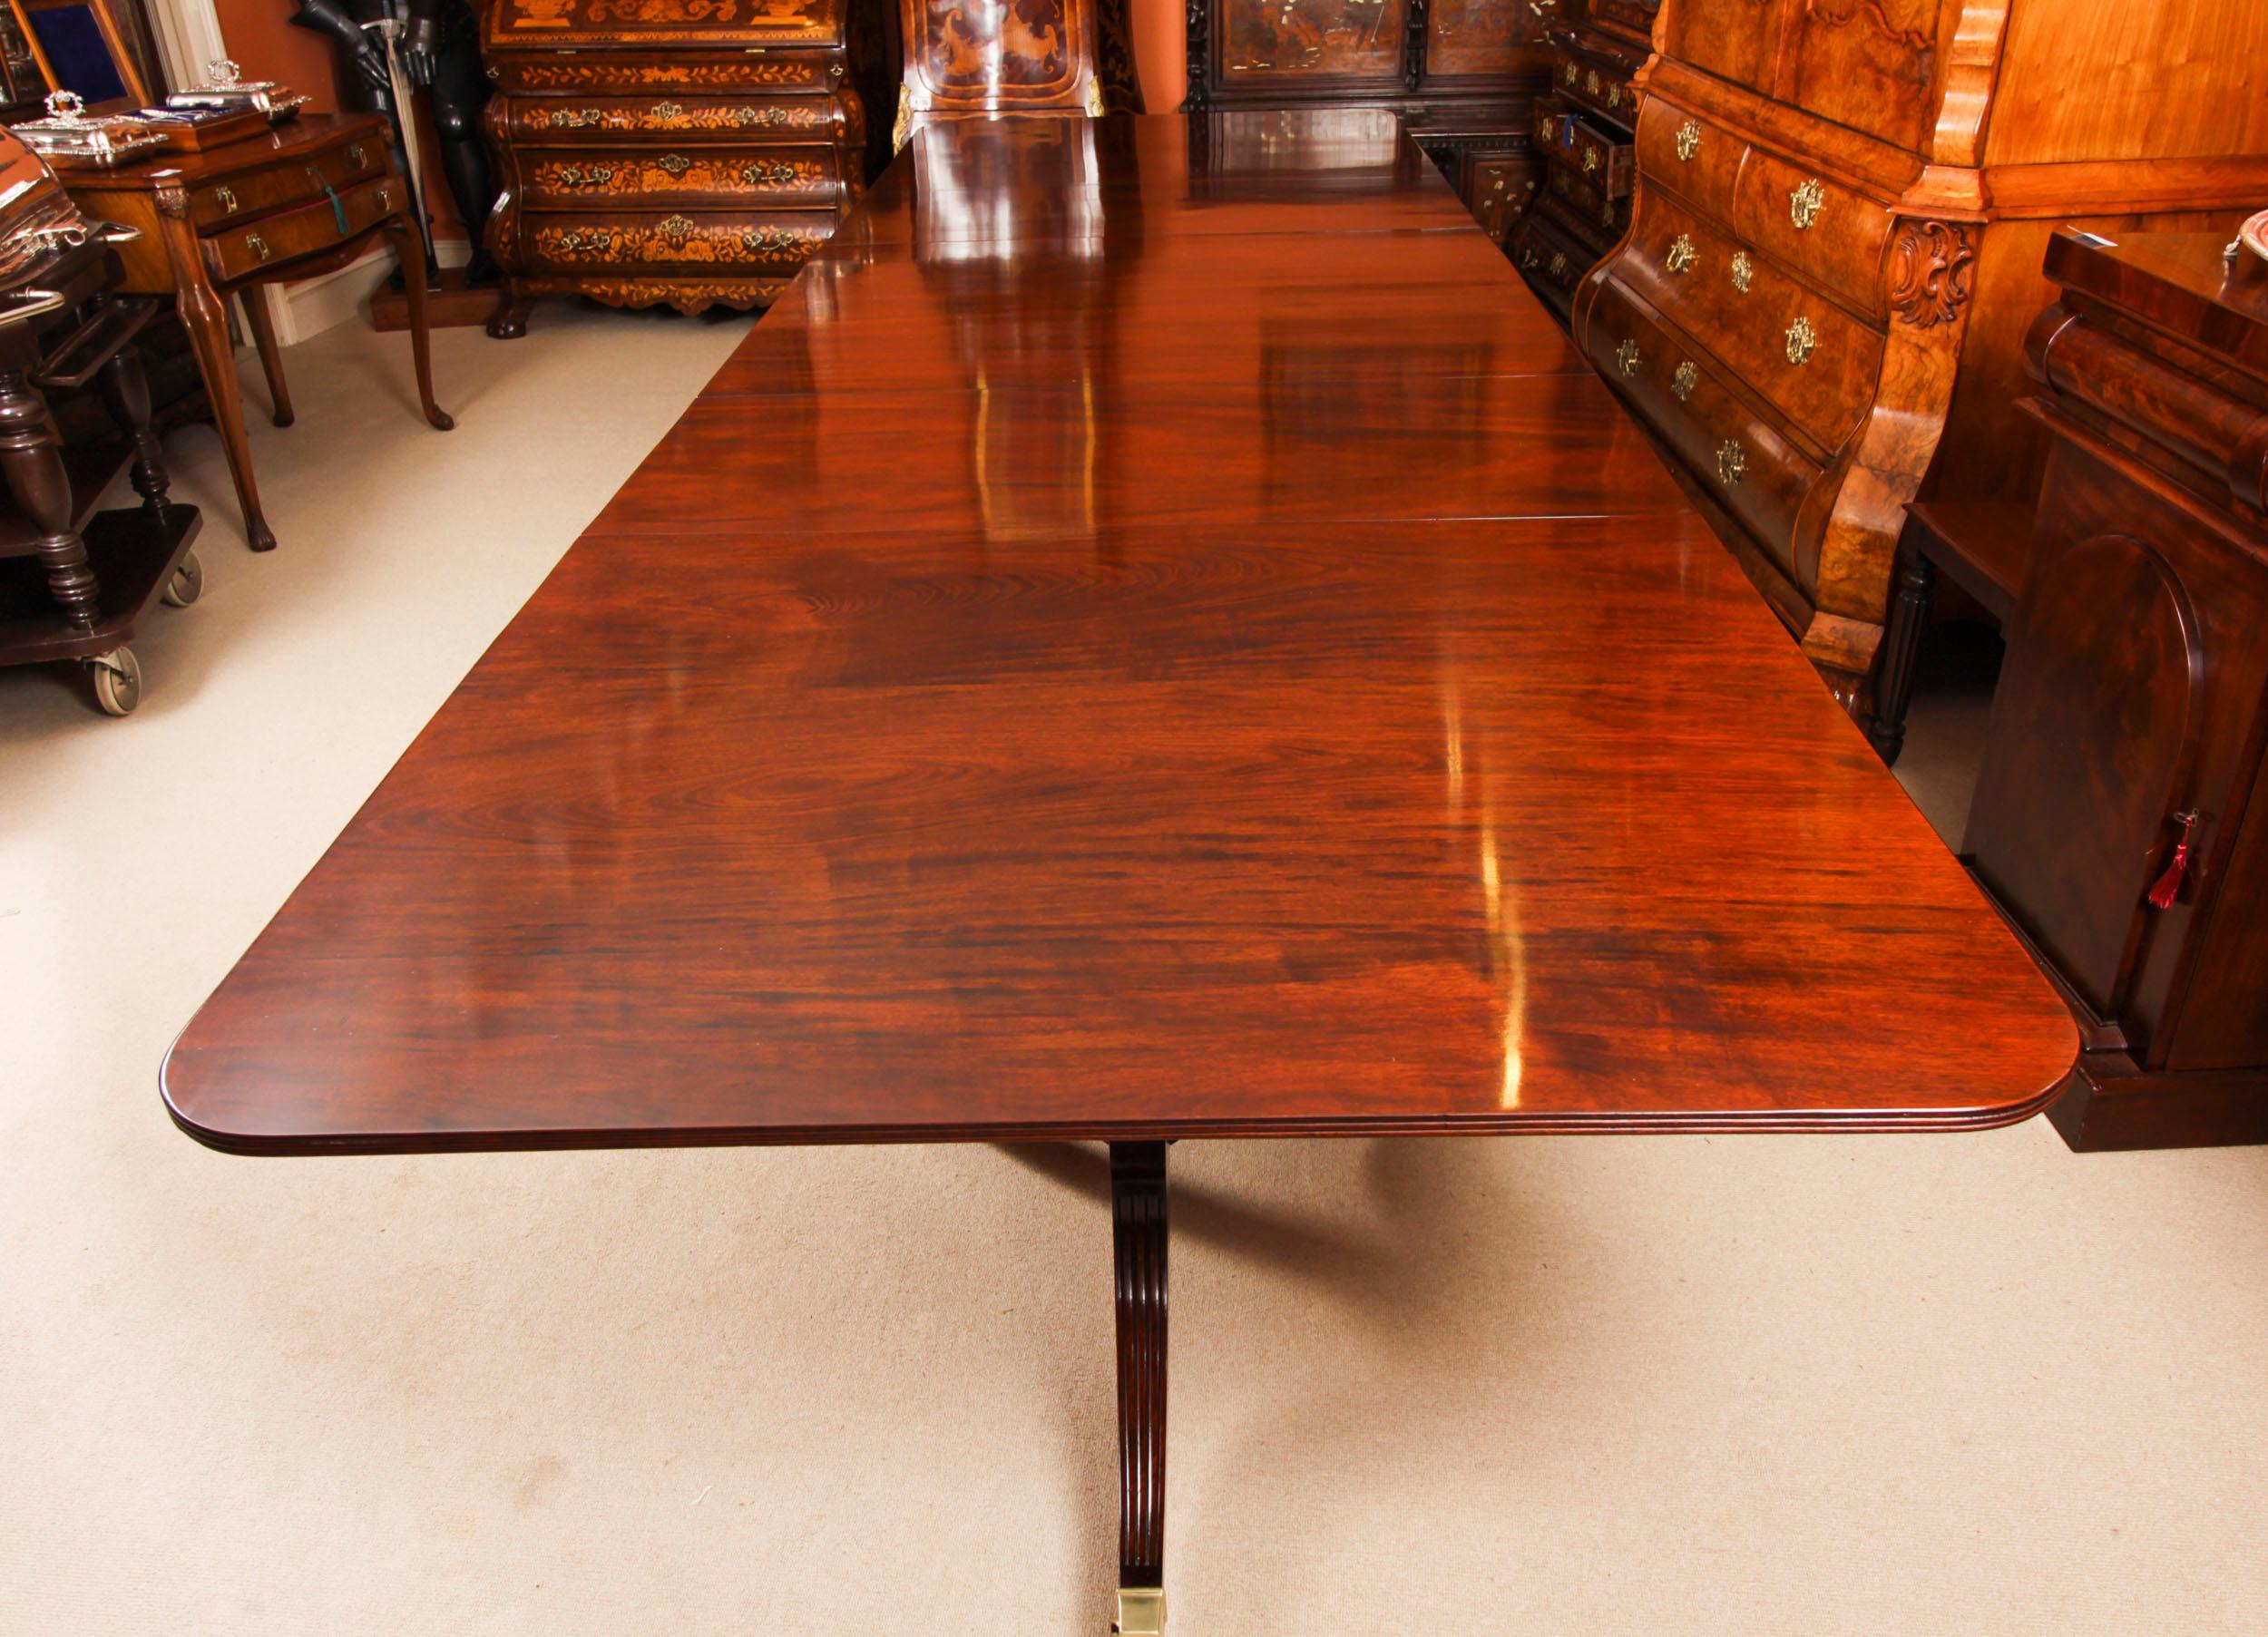 Antique 14ft Flame Mahogany Regency Revival Triple Pillar Dining Table 19th C For Sale 6